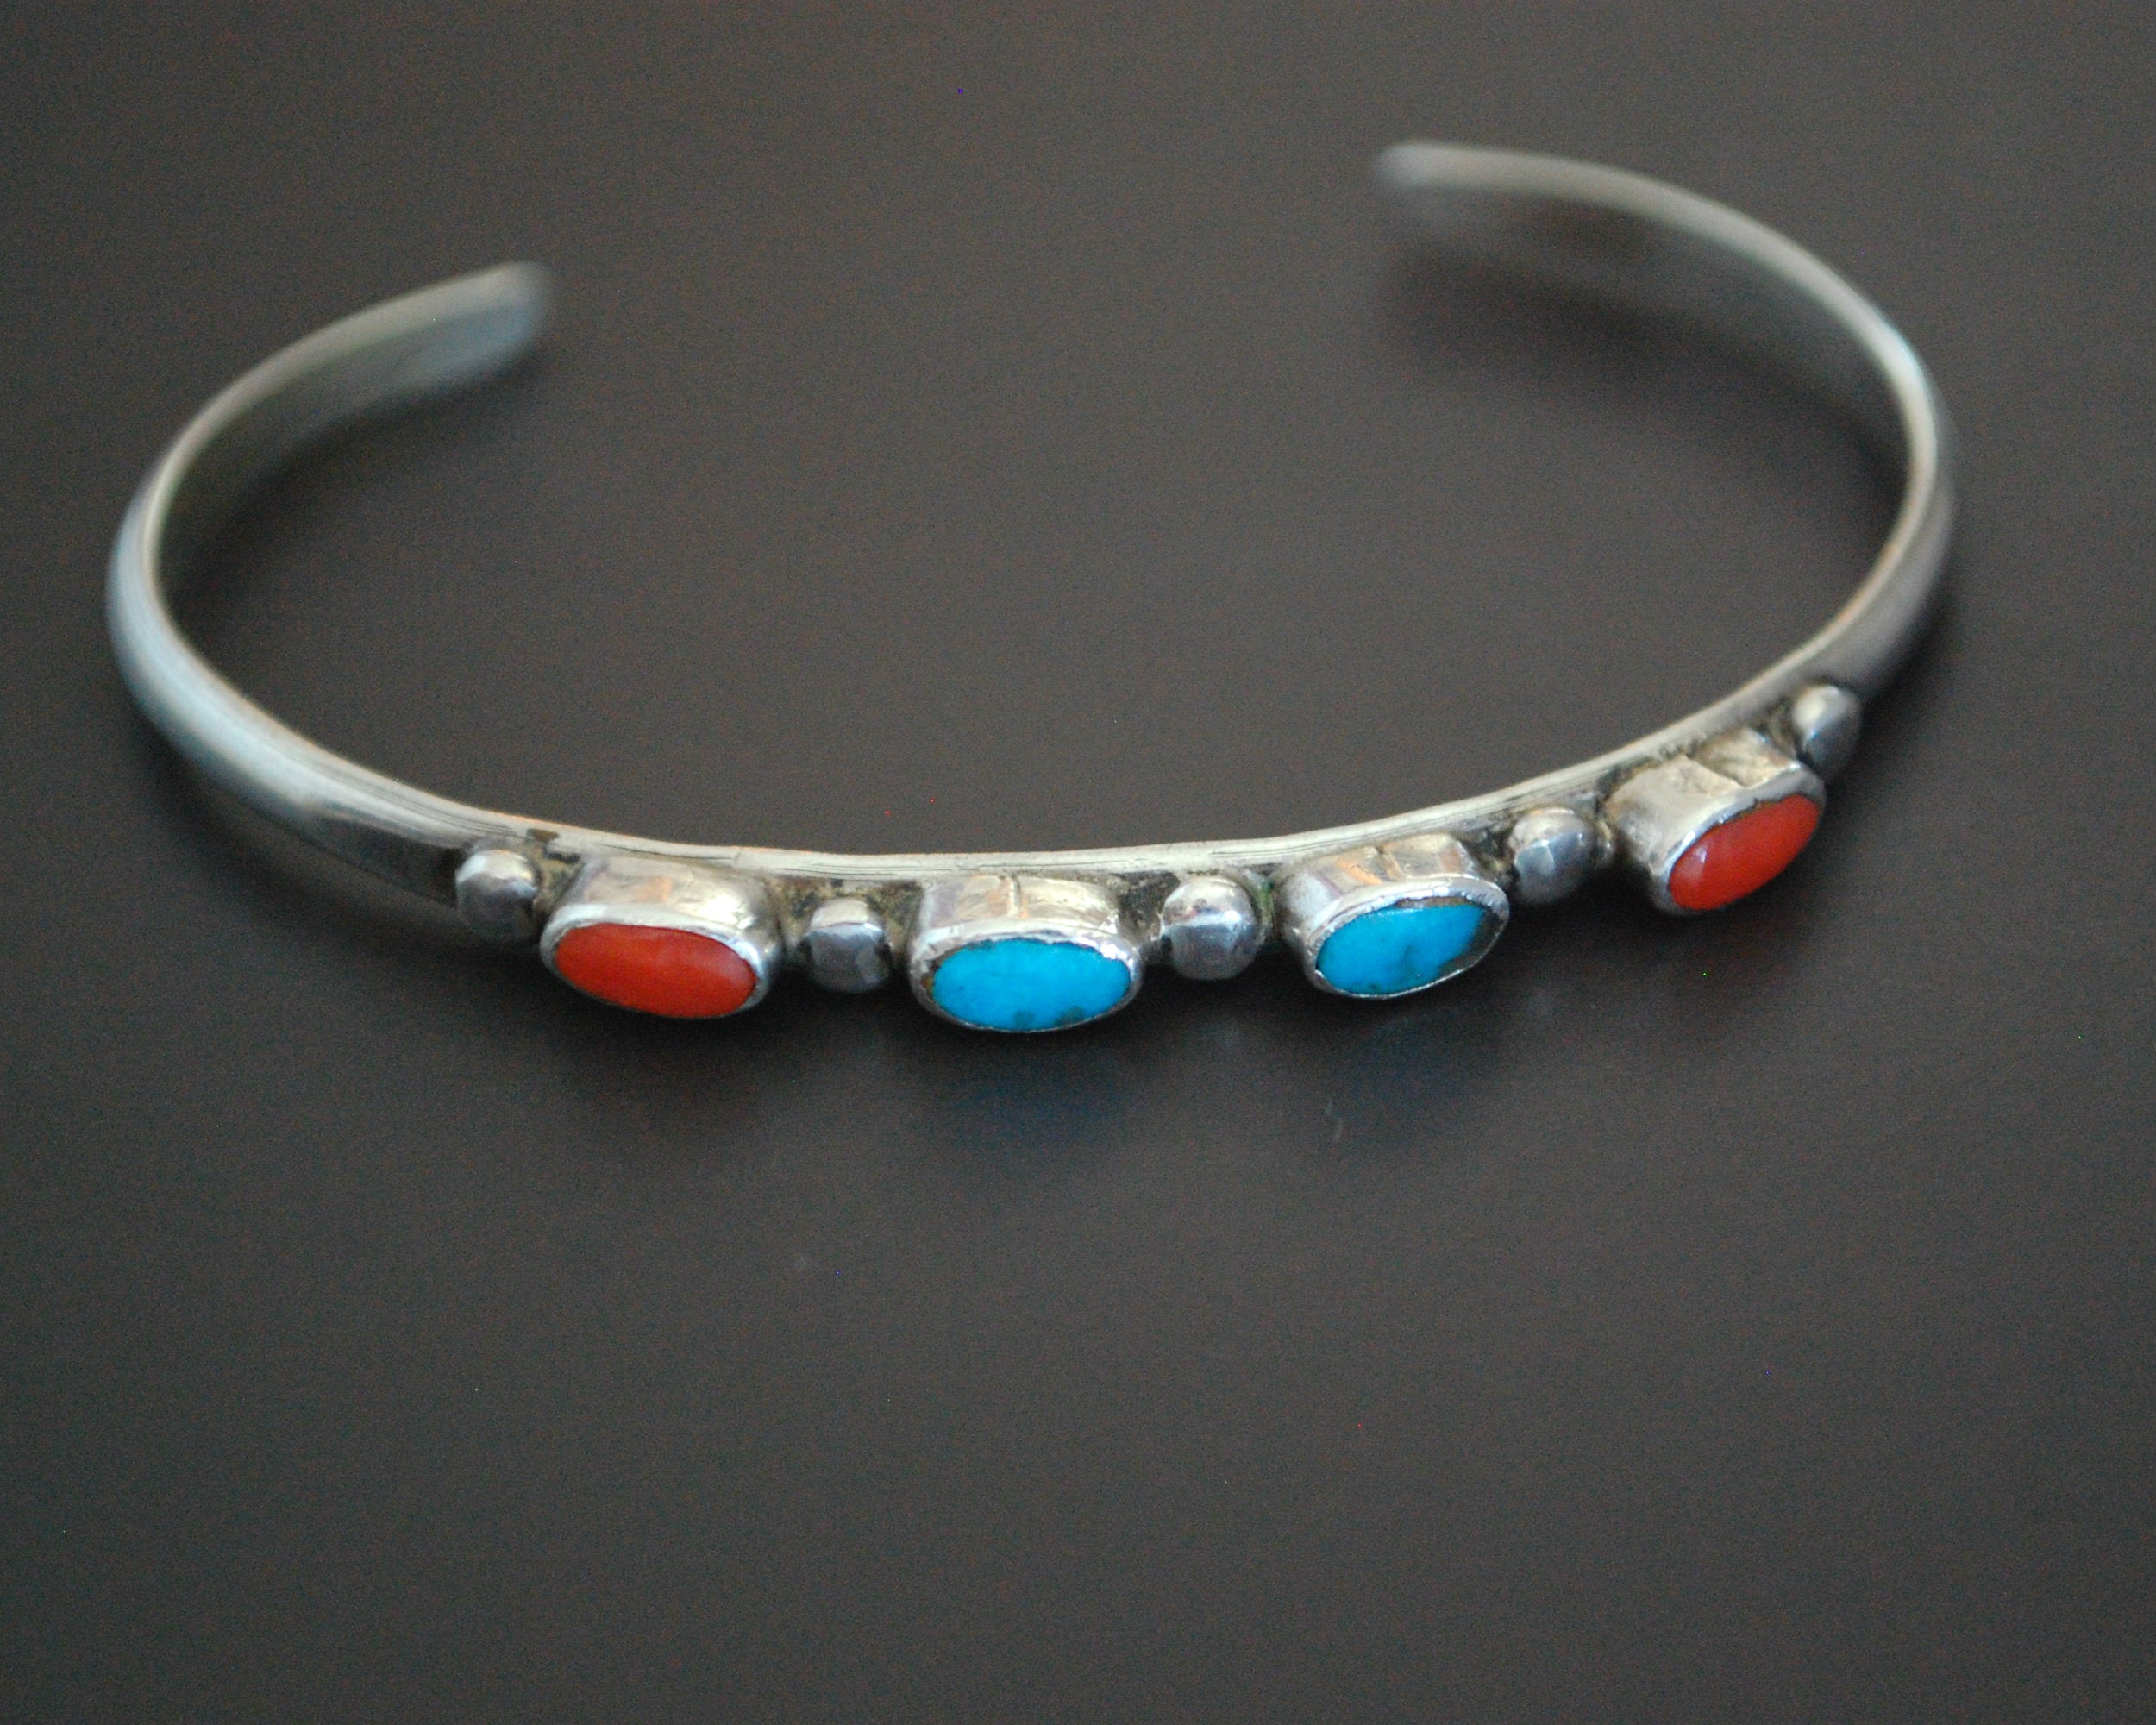 XSmall Ethnic Turquoise Coral Cuff Bracelet